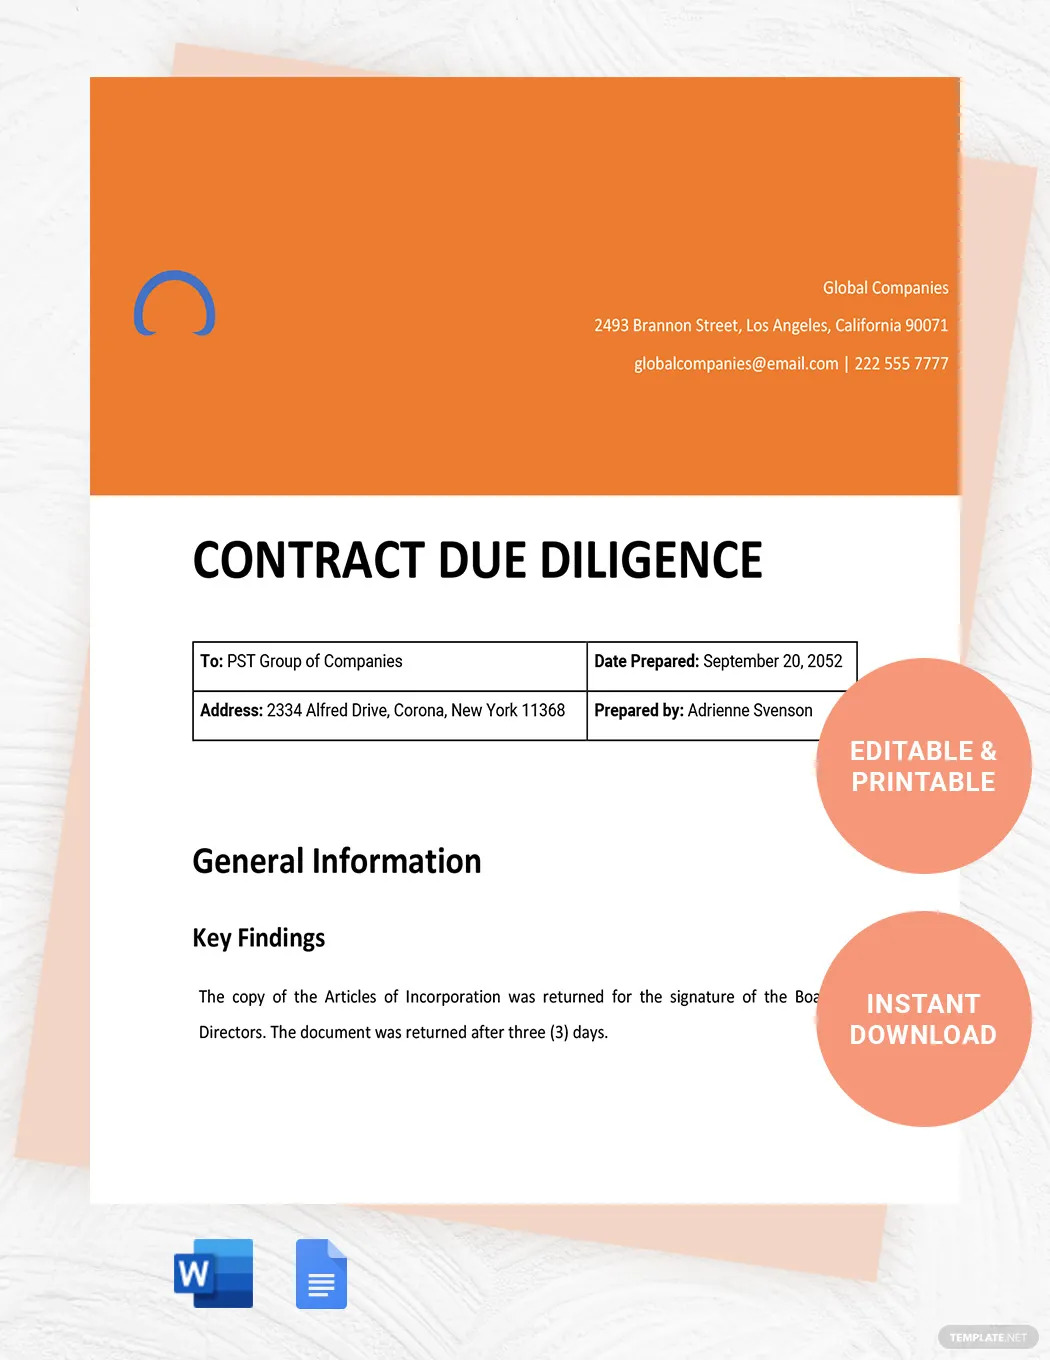 contract due diligence ideas and examples